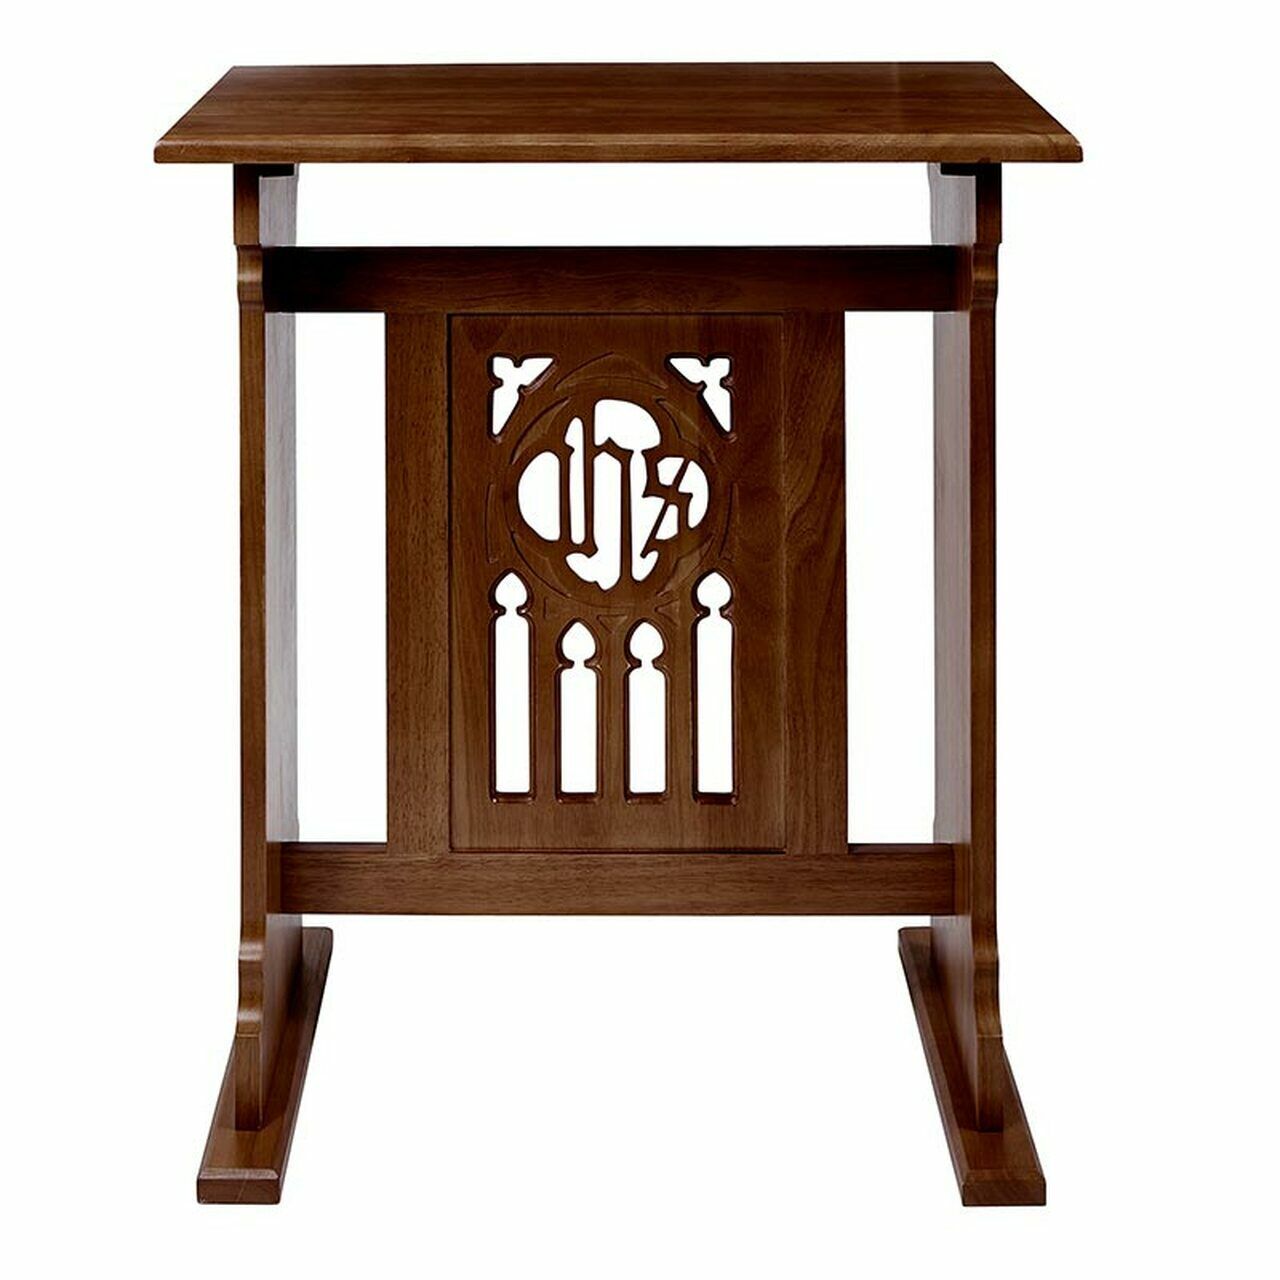 Walnut Maple Hardwood Florentine Collection Credence Table for Church, 32 In